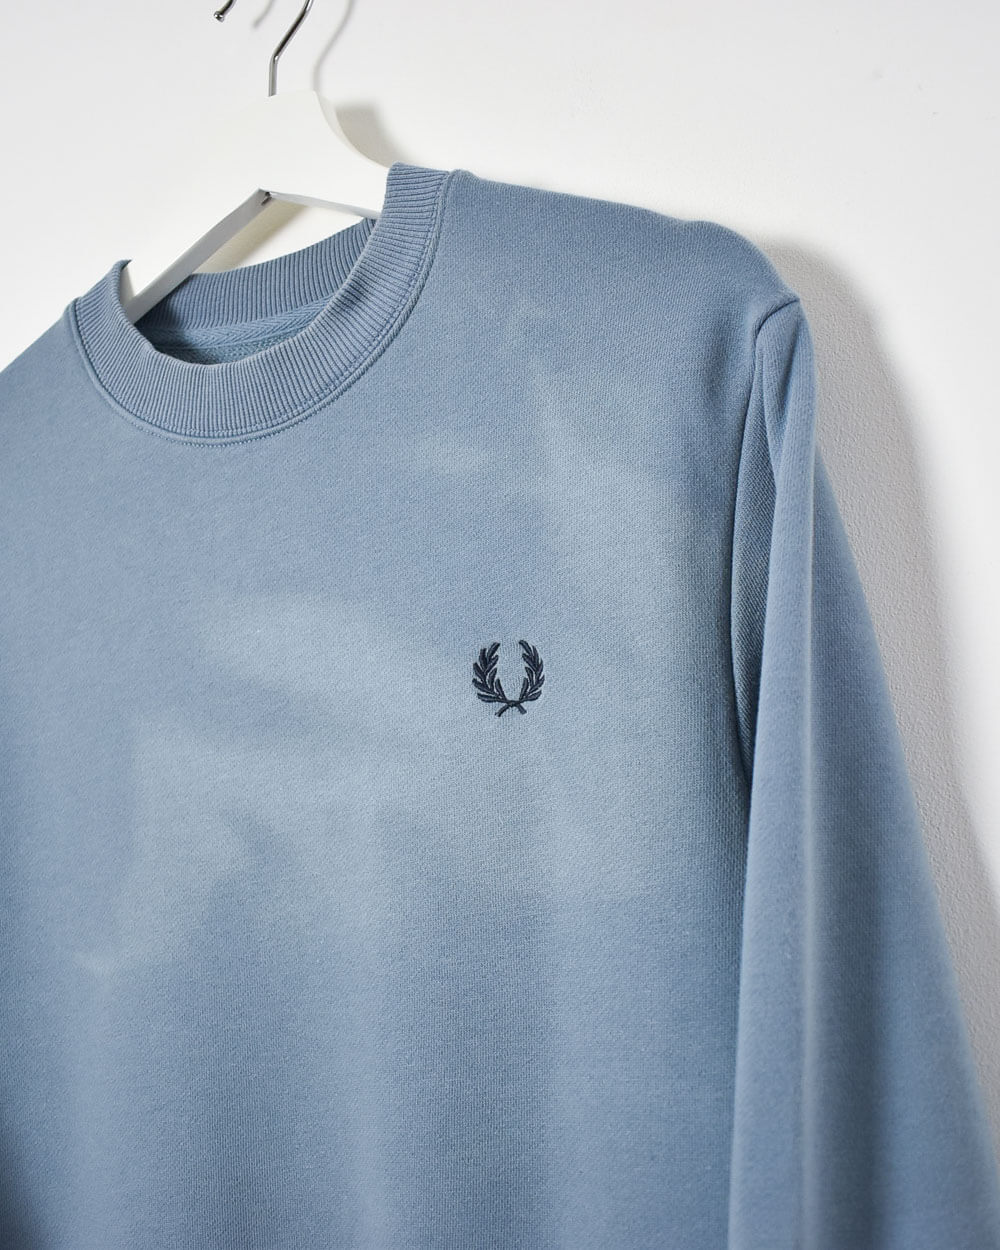 Fred Perry Sweatshirt - Small - Domno Vintage 90s, 80s, 00s Retro and Vintage Clothing 